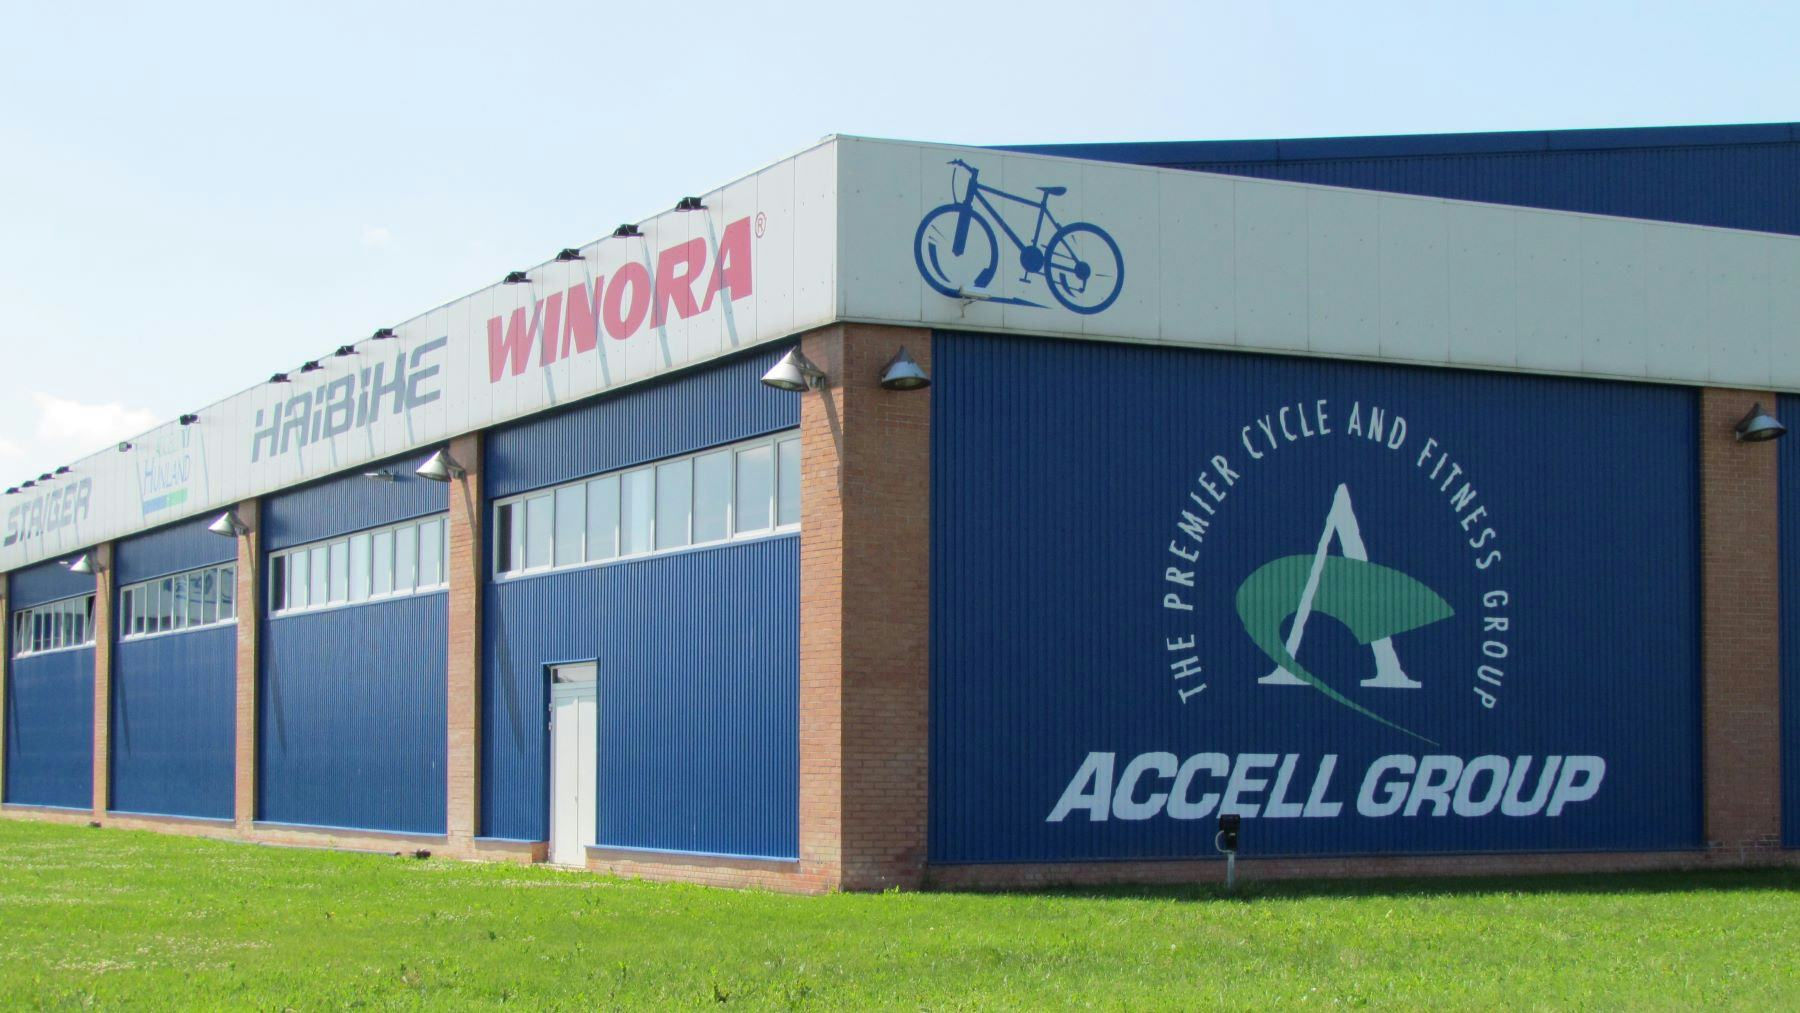 The relocation of production from Heerenveen, the Netherlands to other European locations such as in Hungary (pictured) will result in more than a hundred job losses for the Accell Group. - Photo Bike Europe